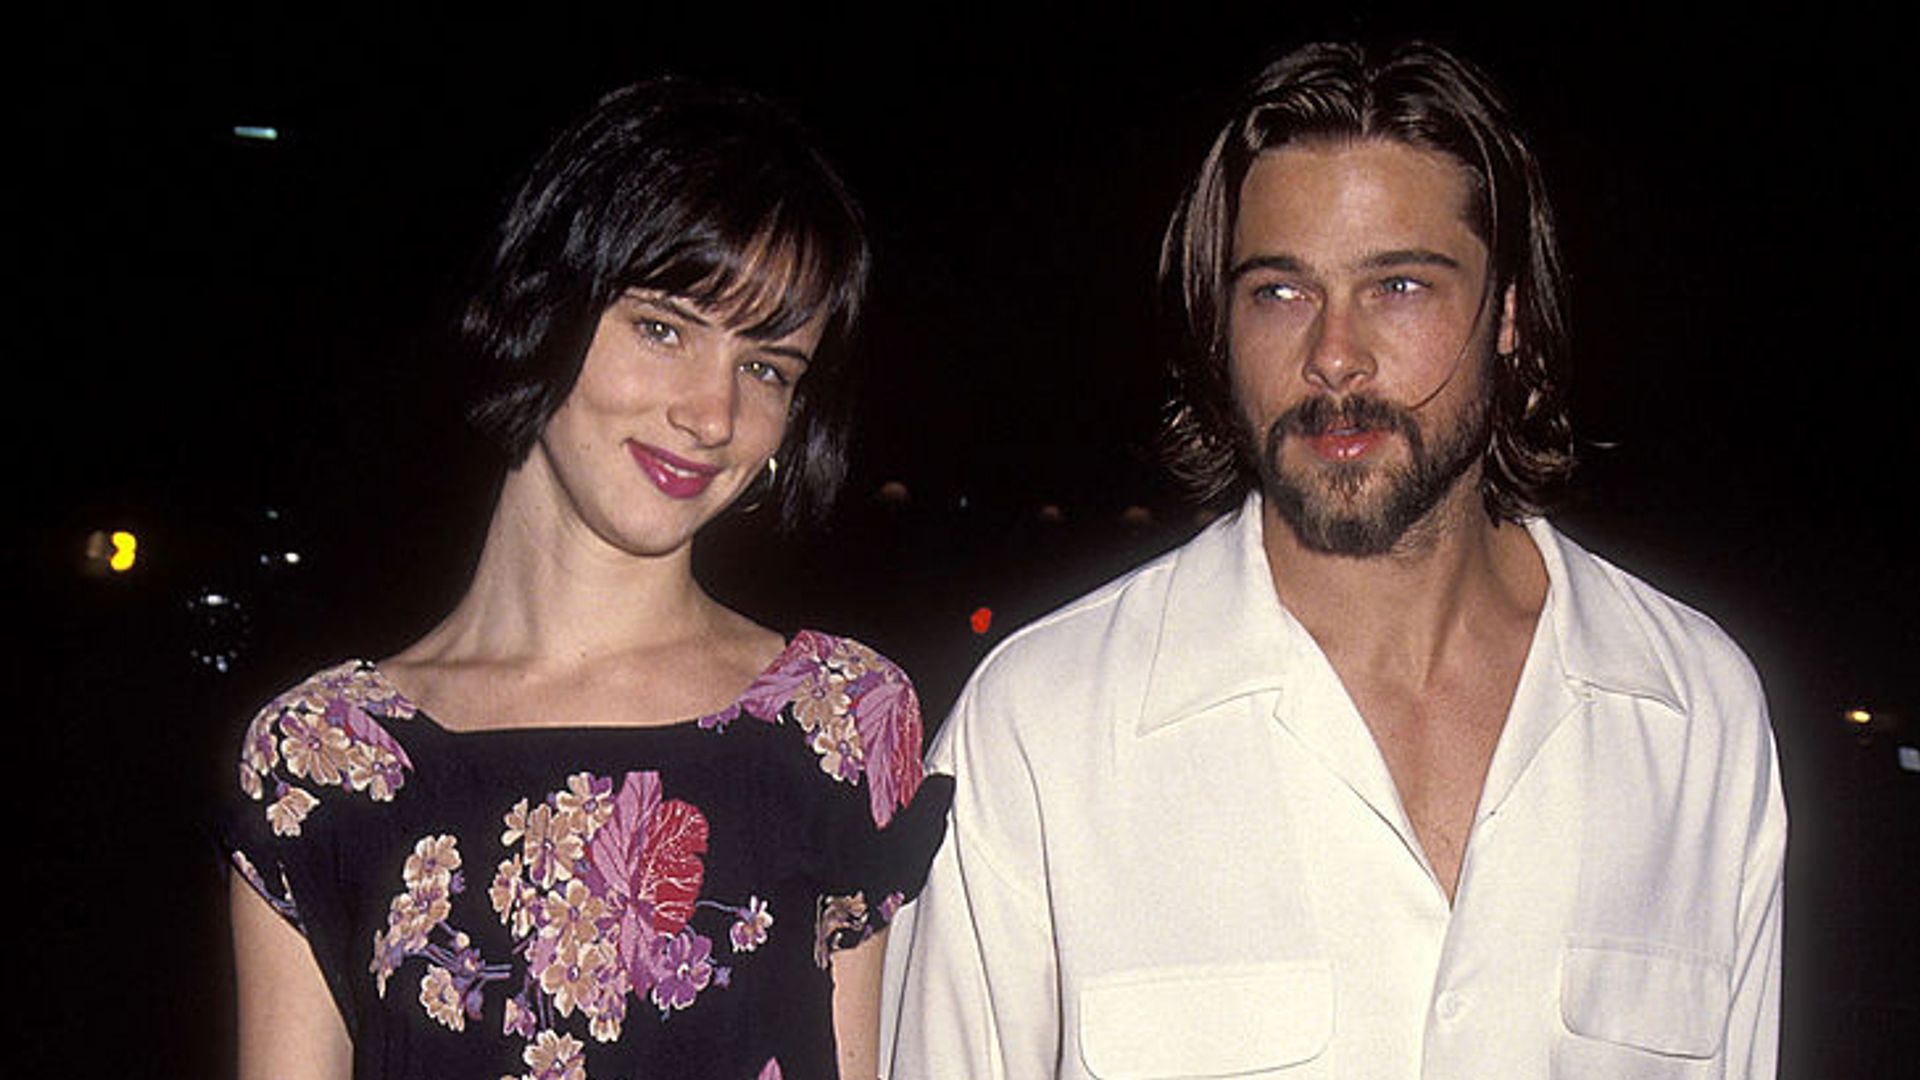 Juliette Lewis and Brad Pitt holding hands at the Johnny Suede Beverly Hills Premiere. She is wearing a floral dress while he is wearing a white shirt. 